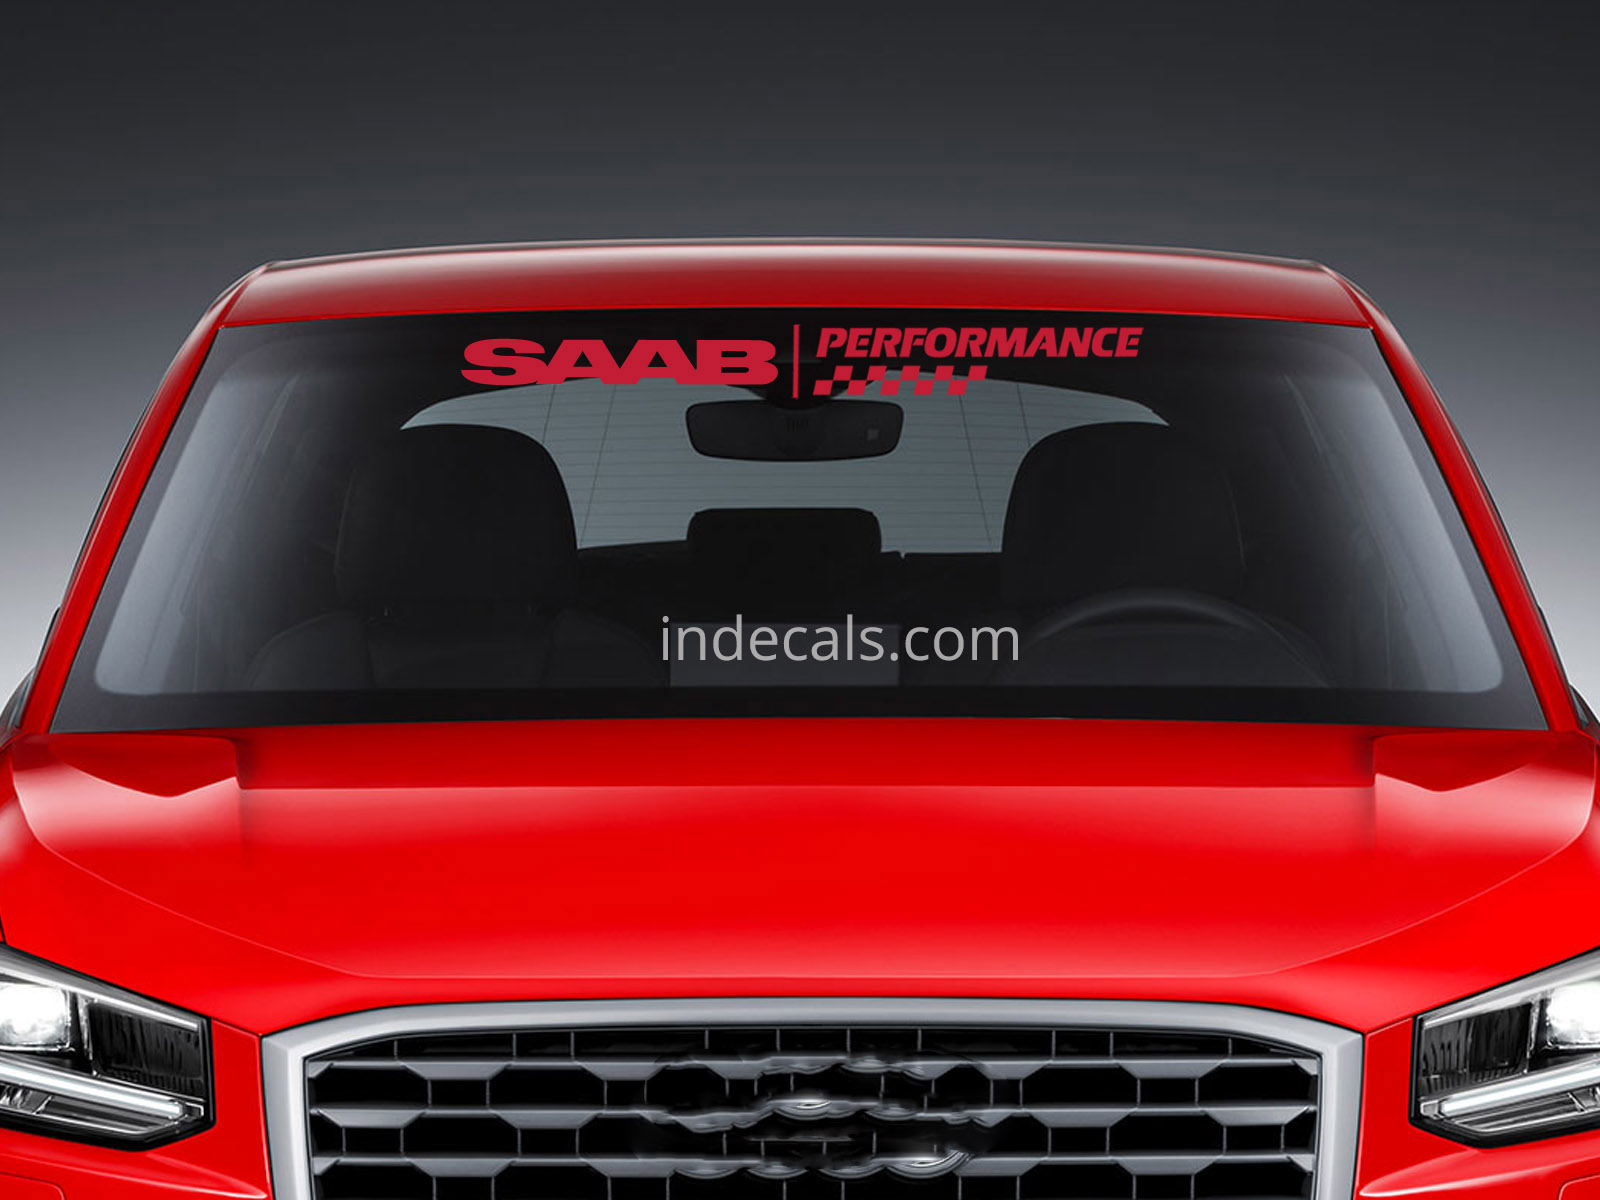 1 x Saab Performance Sticker for Windshield or Back Window - Red